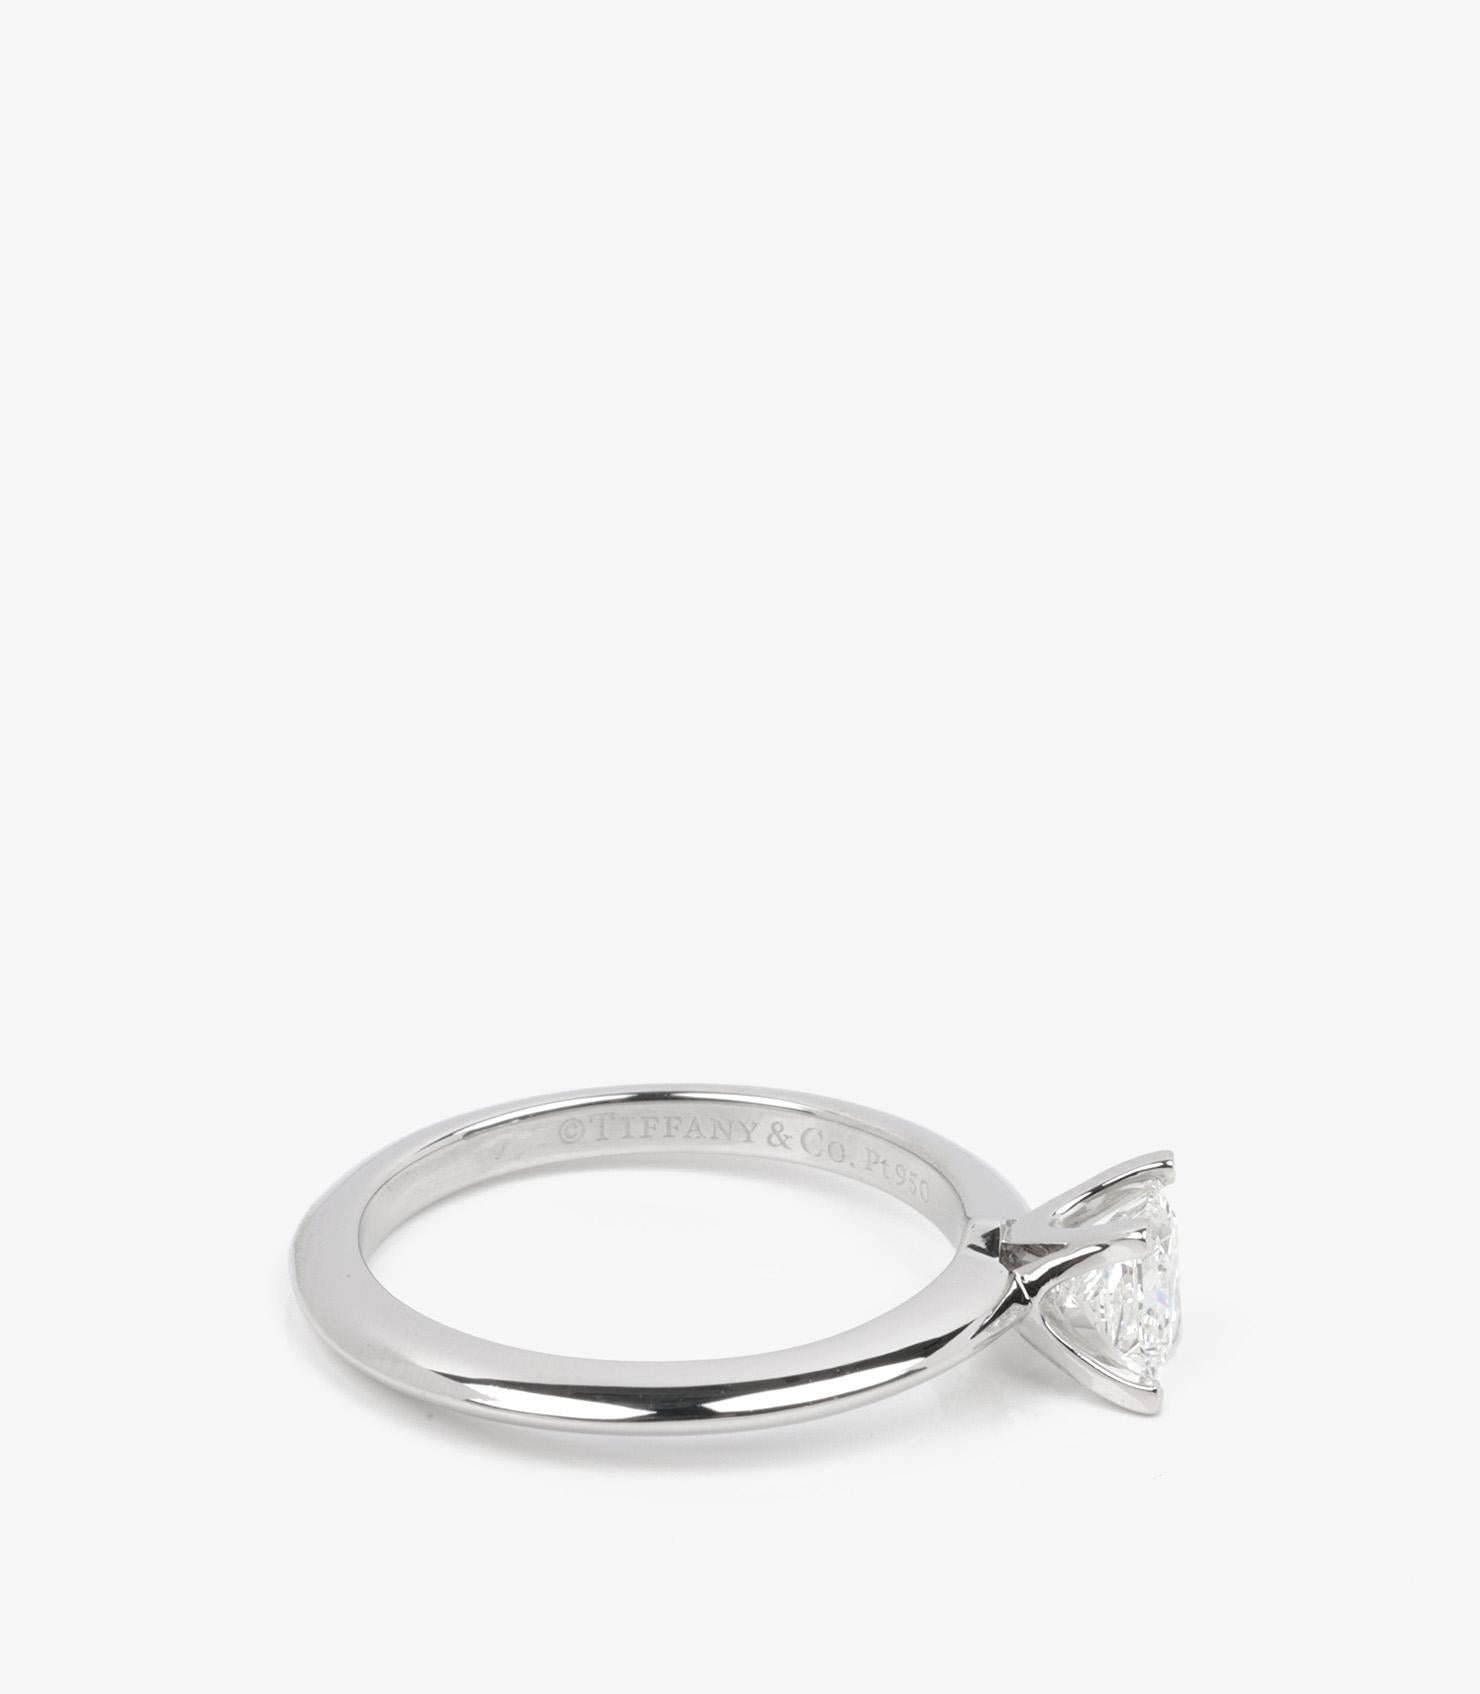 Tiffany & Co. 0.46ct Princess Cut Diamond Platinum Ring In Excellent Condition For Sale In Bishop's Stortford, Hertfordshire